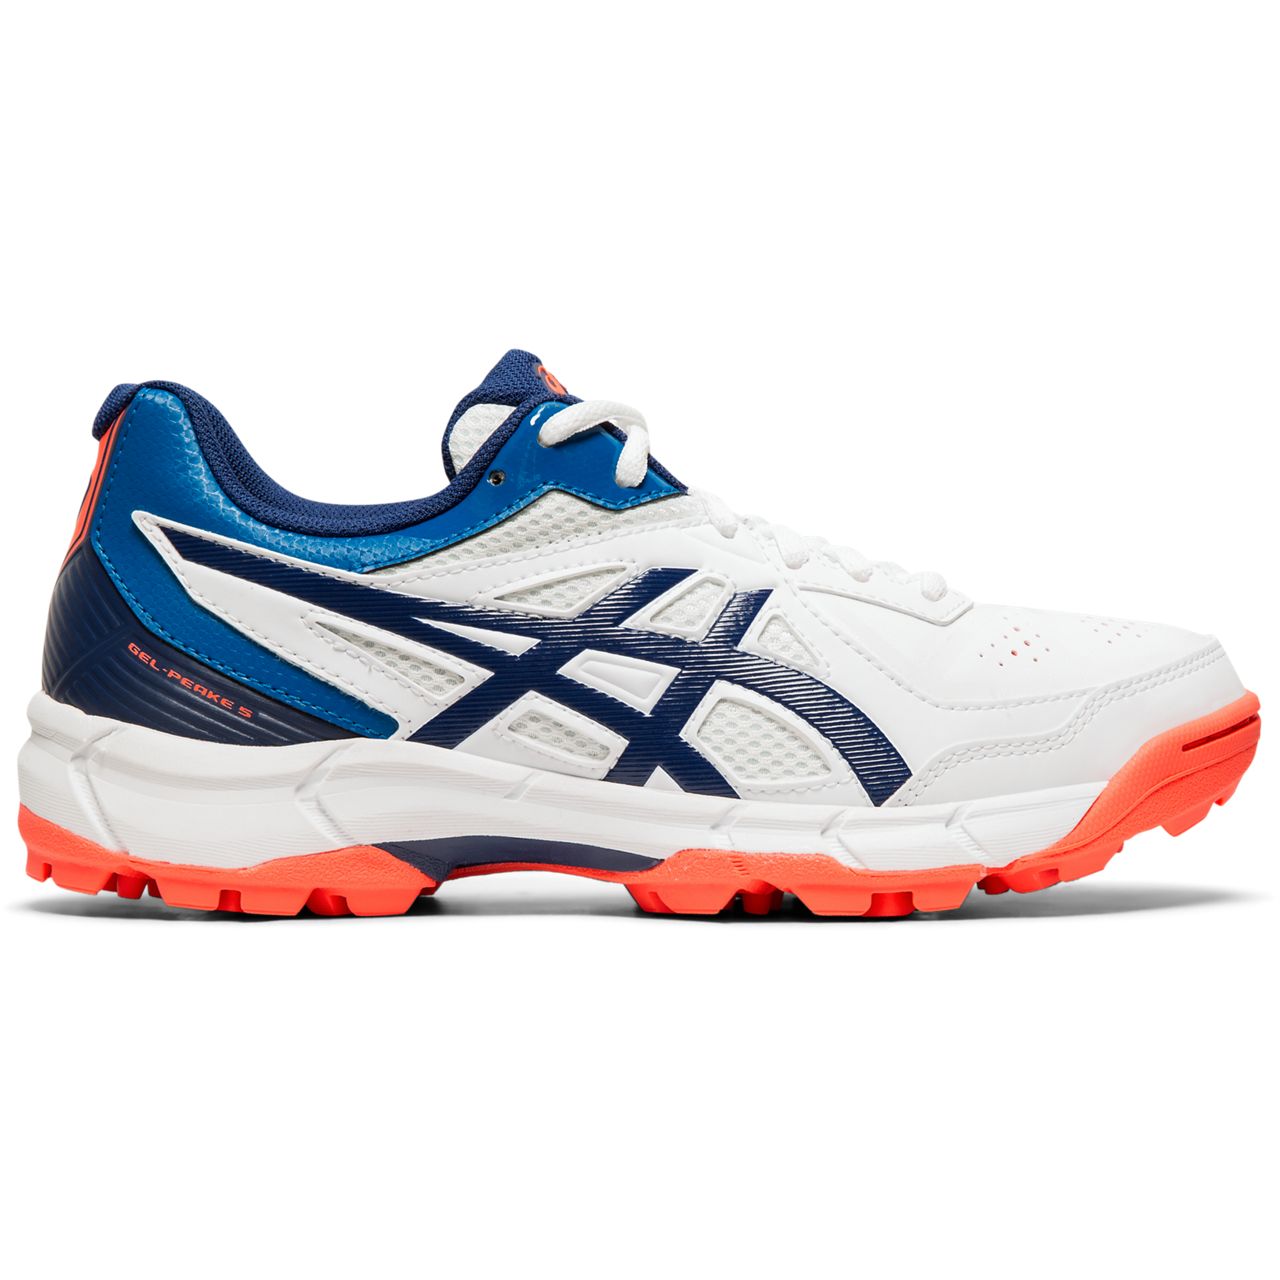 asic cricket shoes